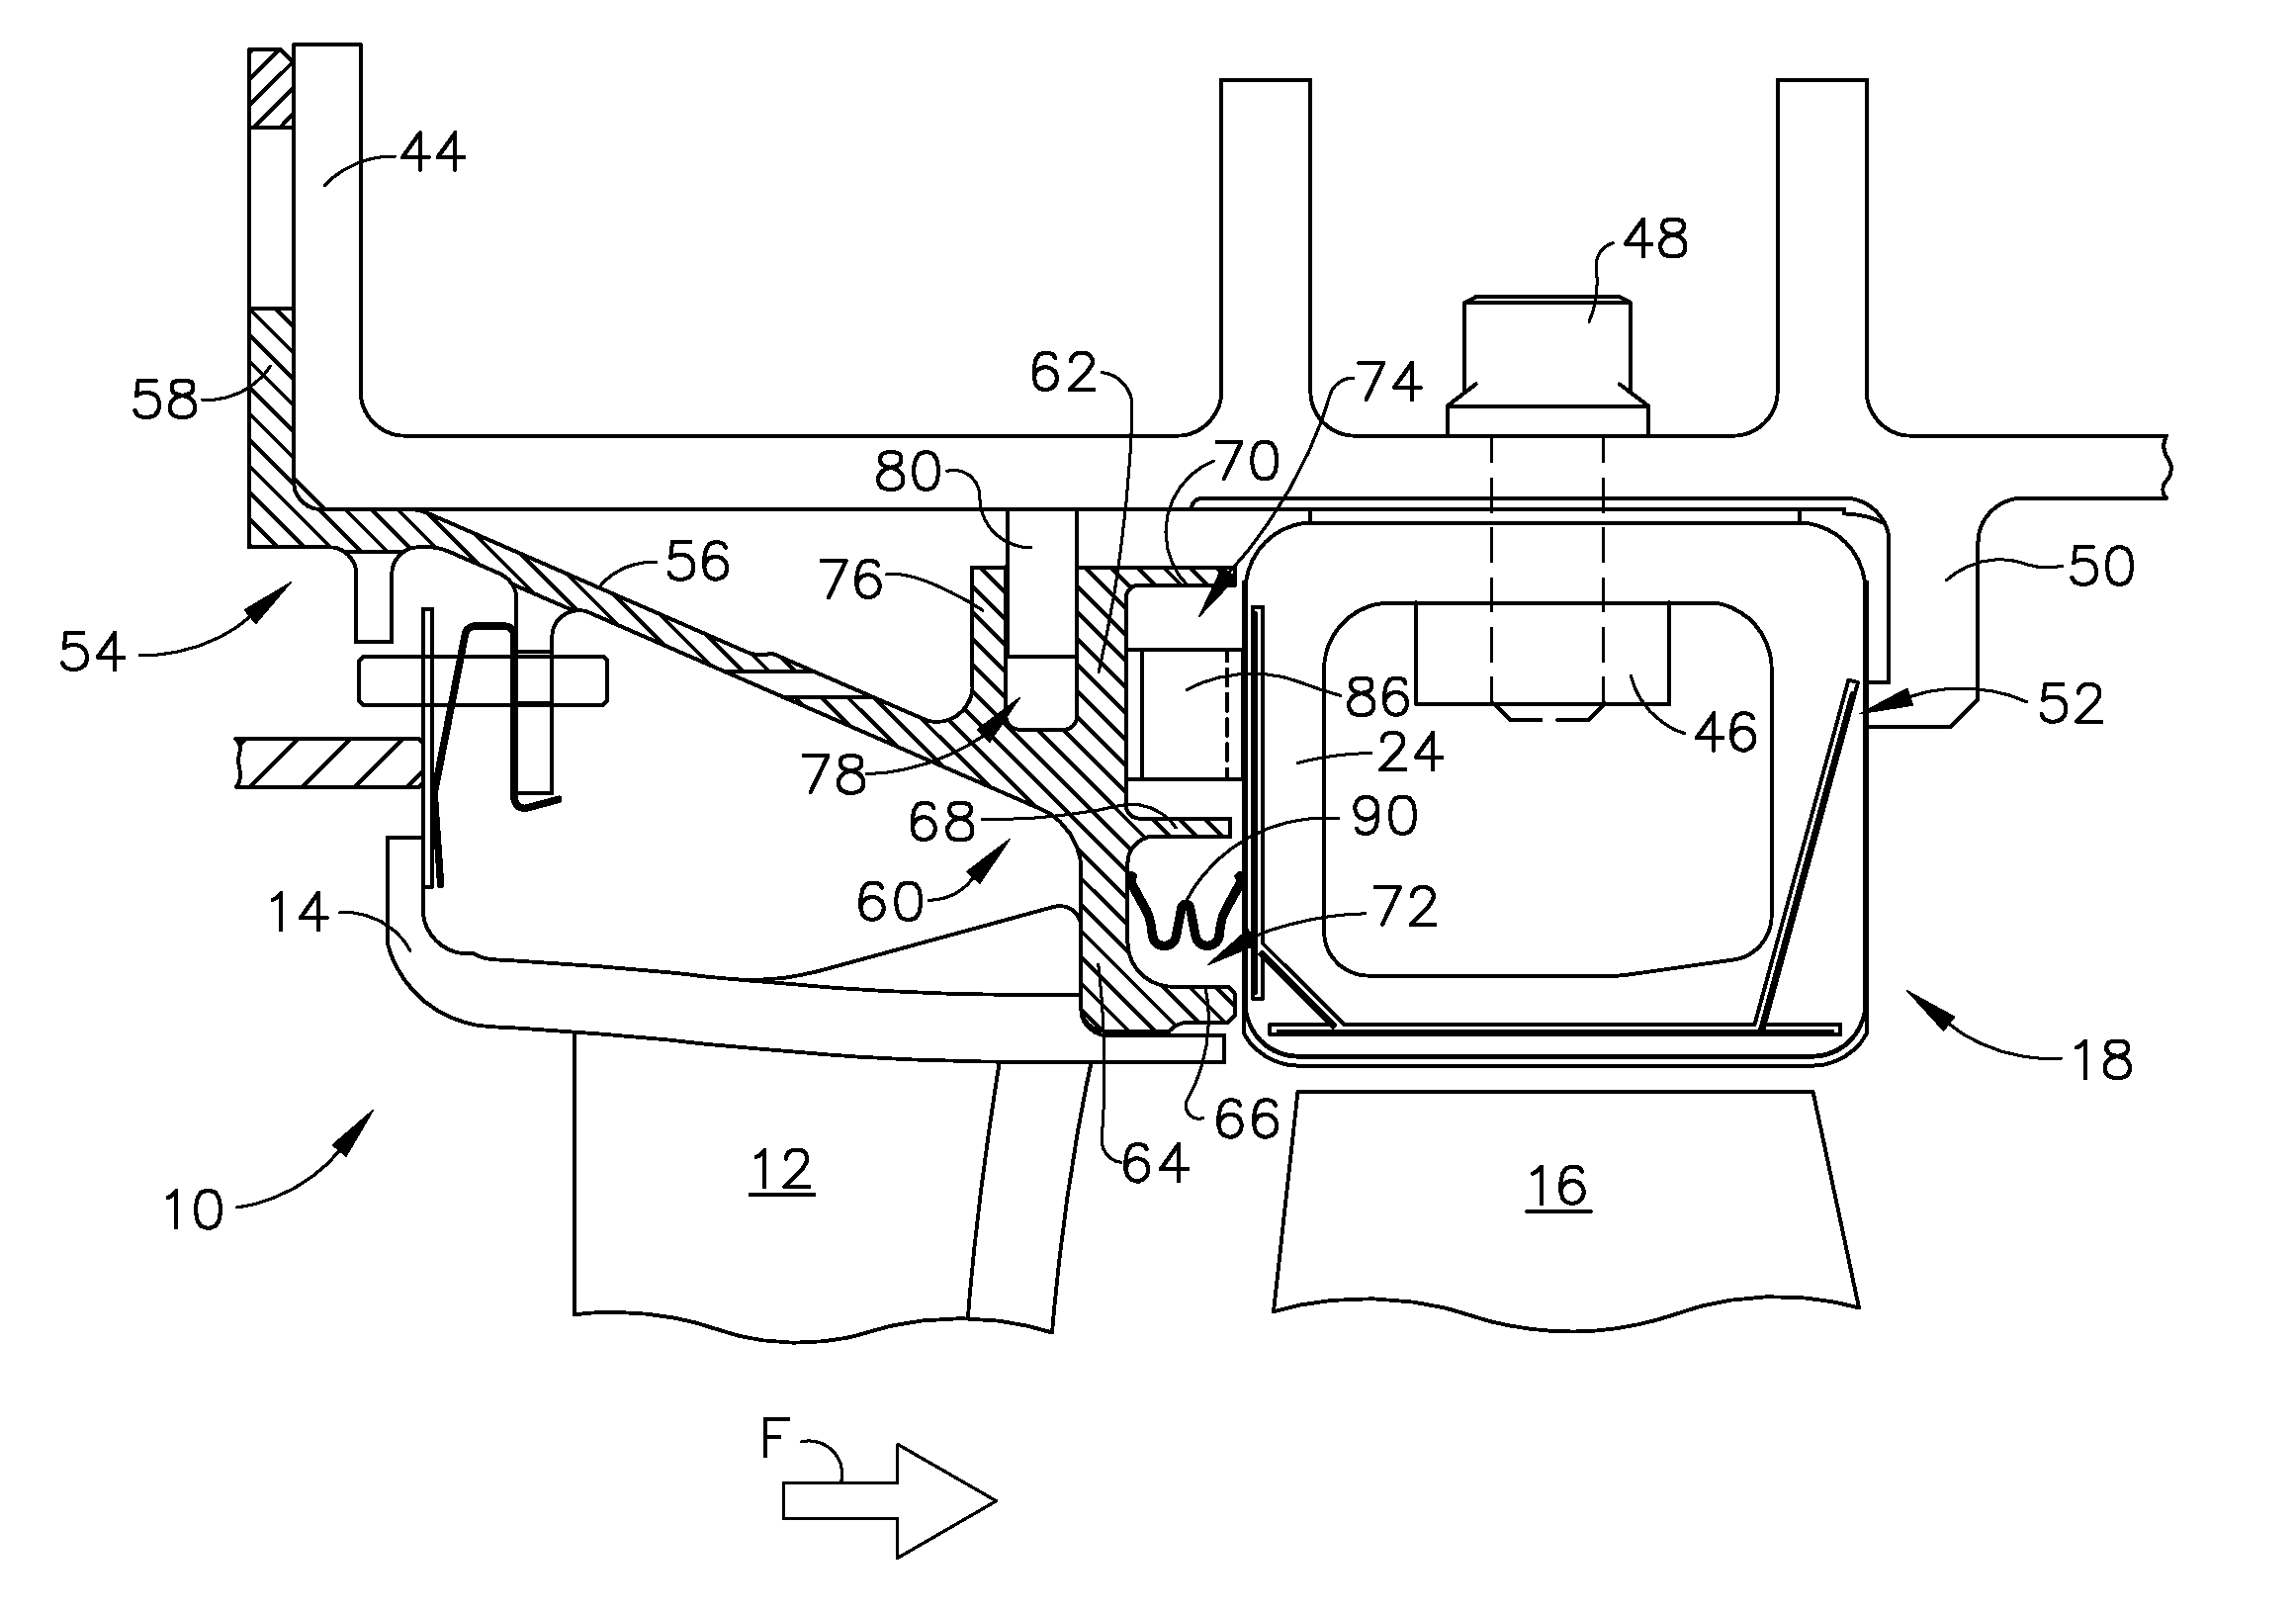 Resilient mounting apparatus for low-ductility turbine shroud